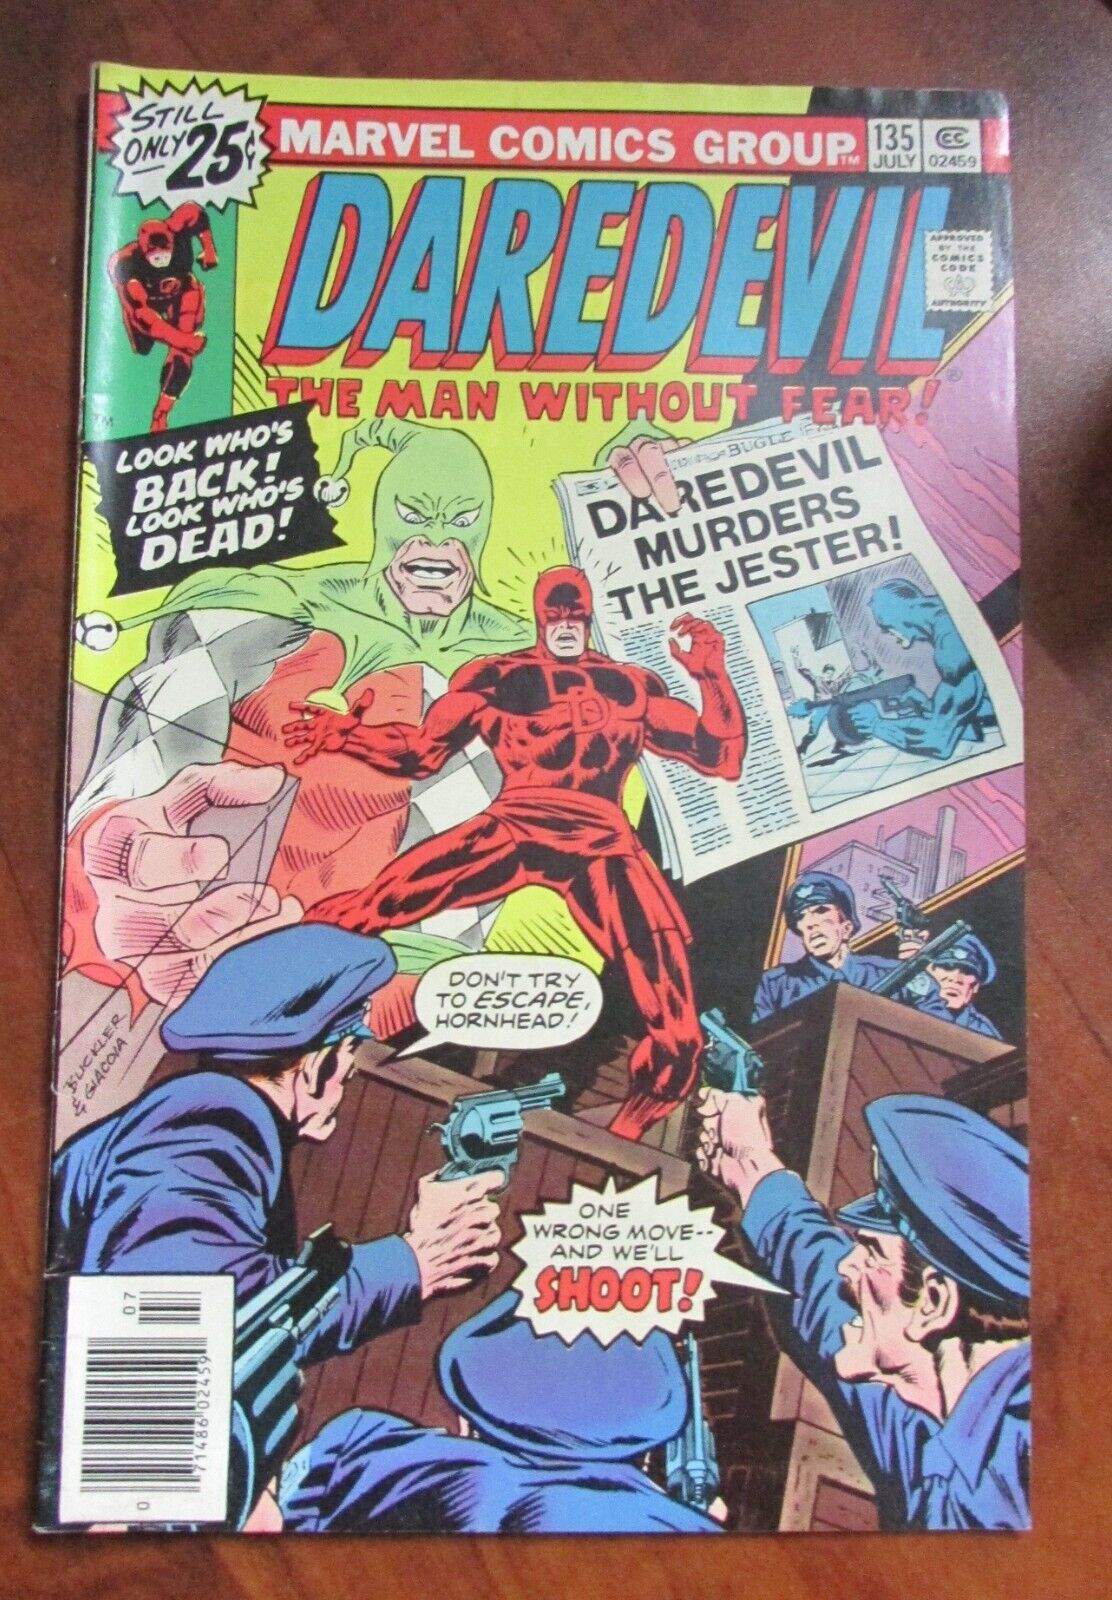 Vintage Daredevil Man Without Fear Marvel Comics Comic Book July 1976